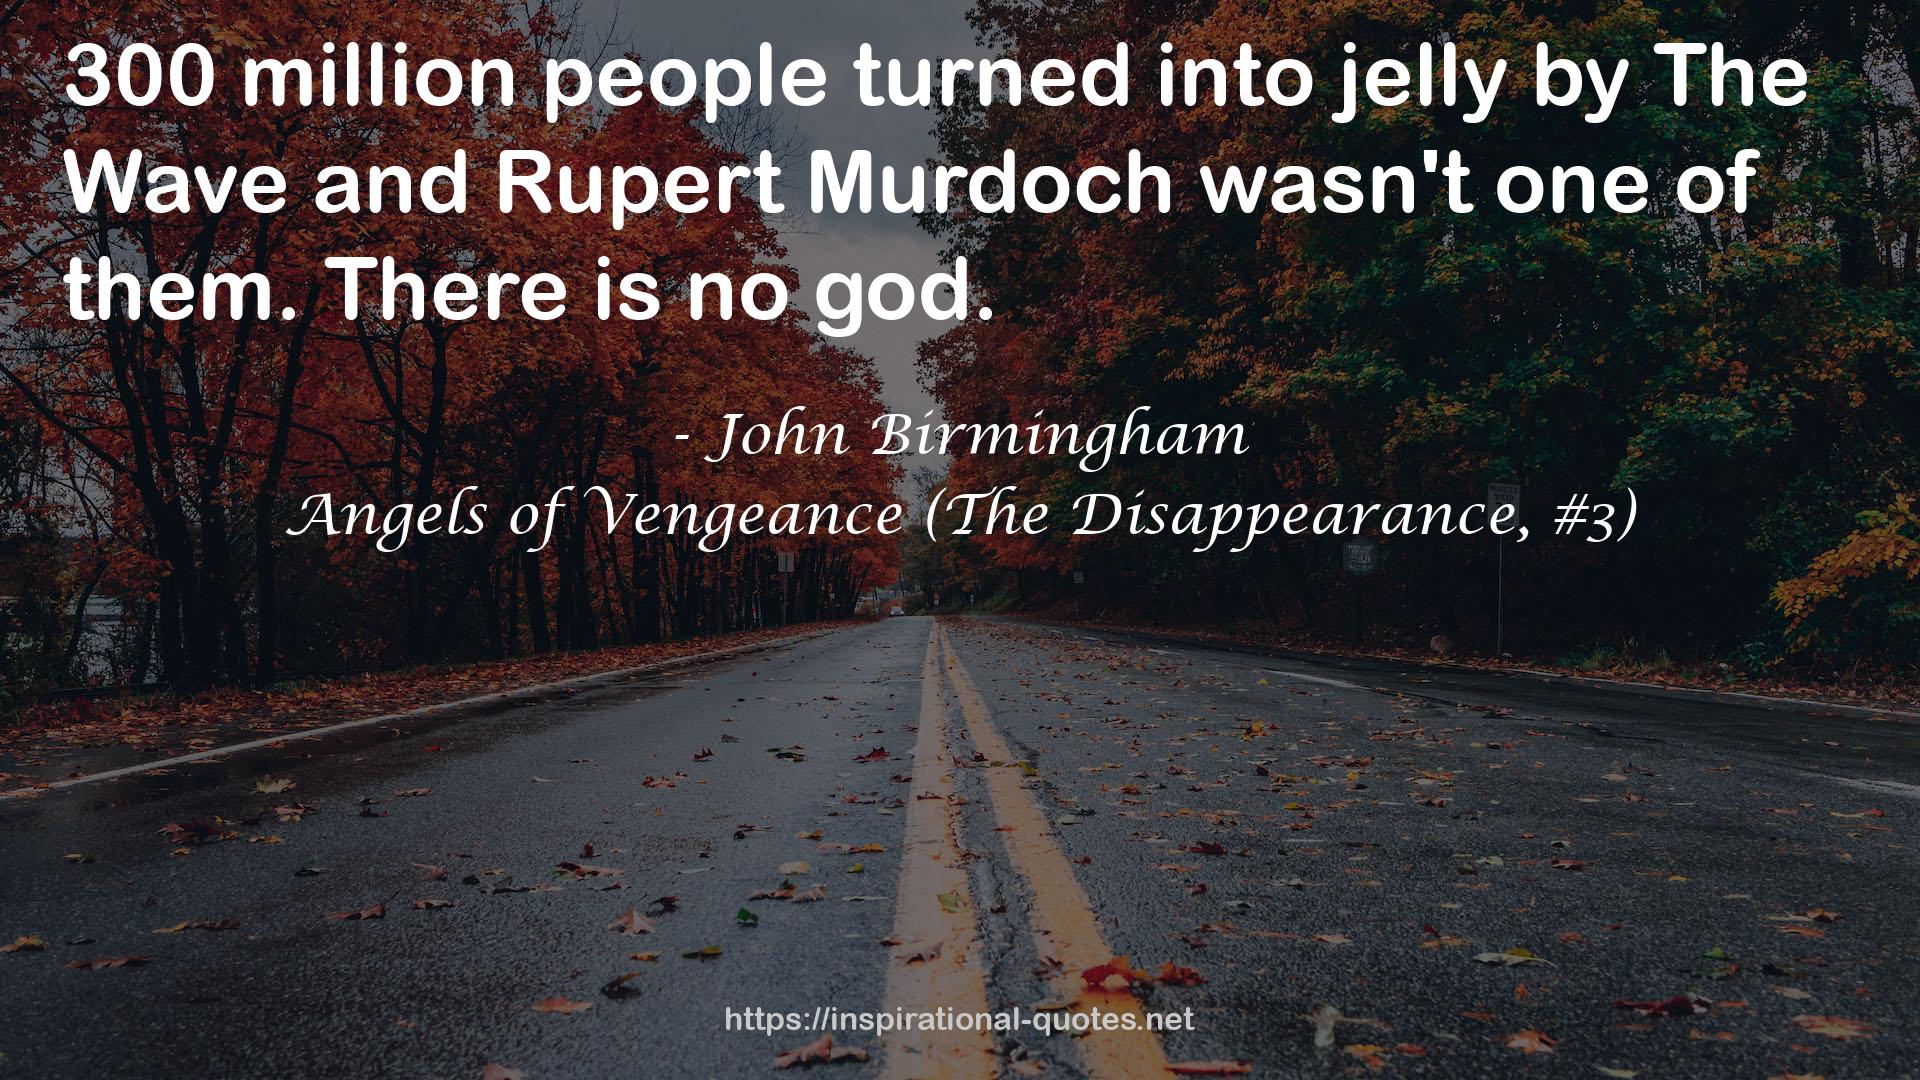 Angels of Vengeance (The Disappearance, #3) QUOTES